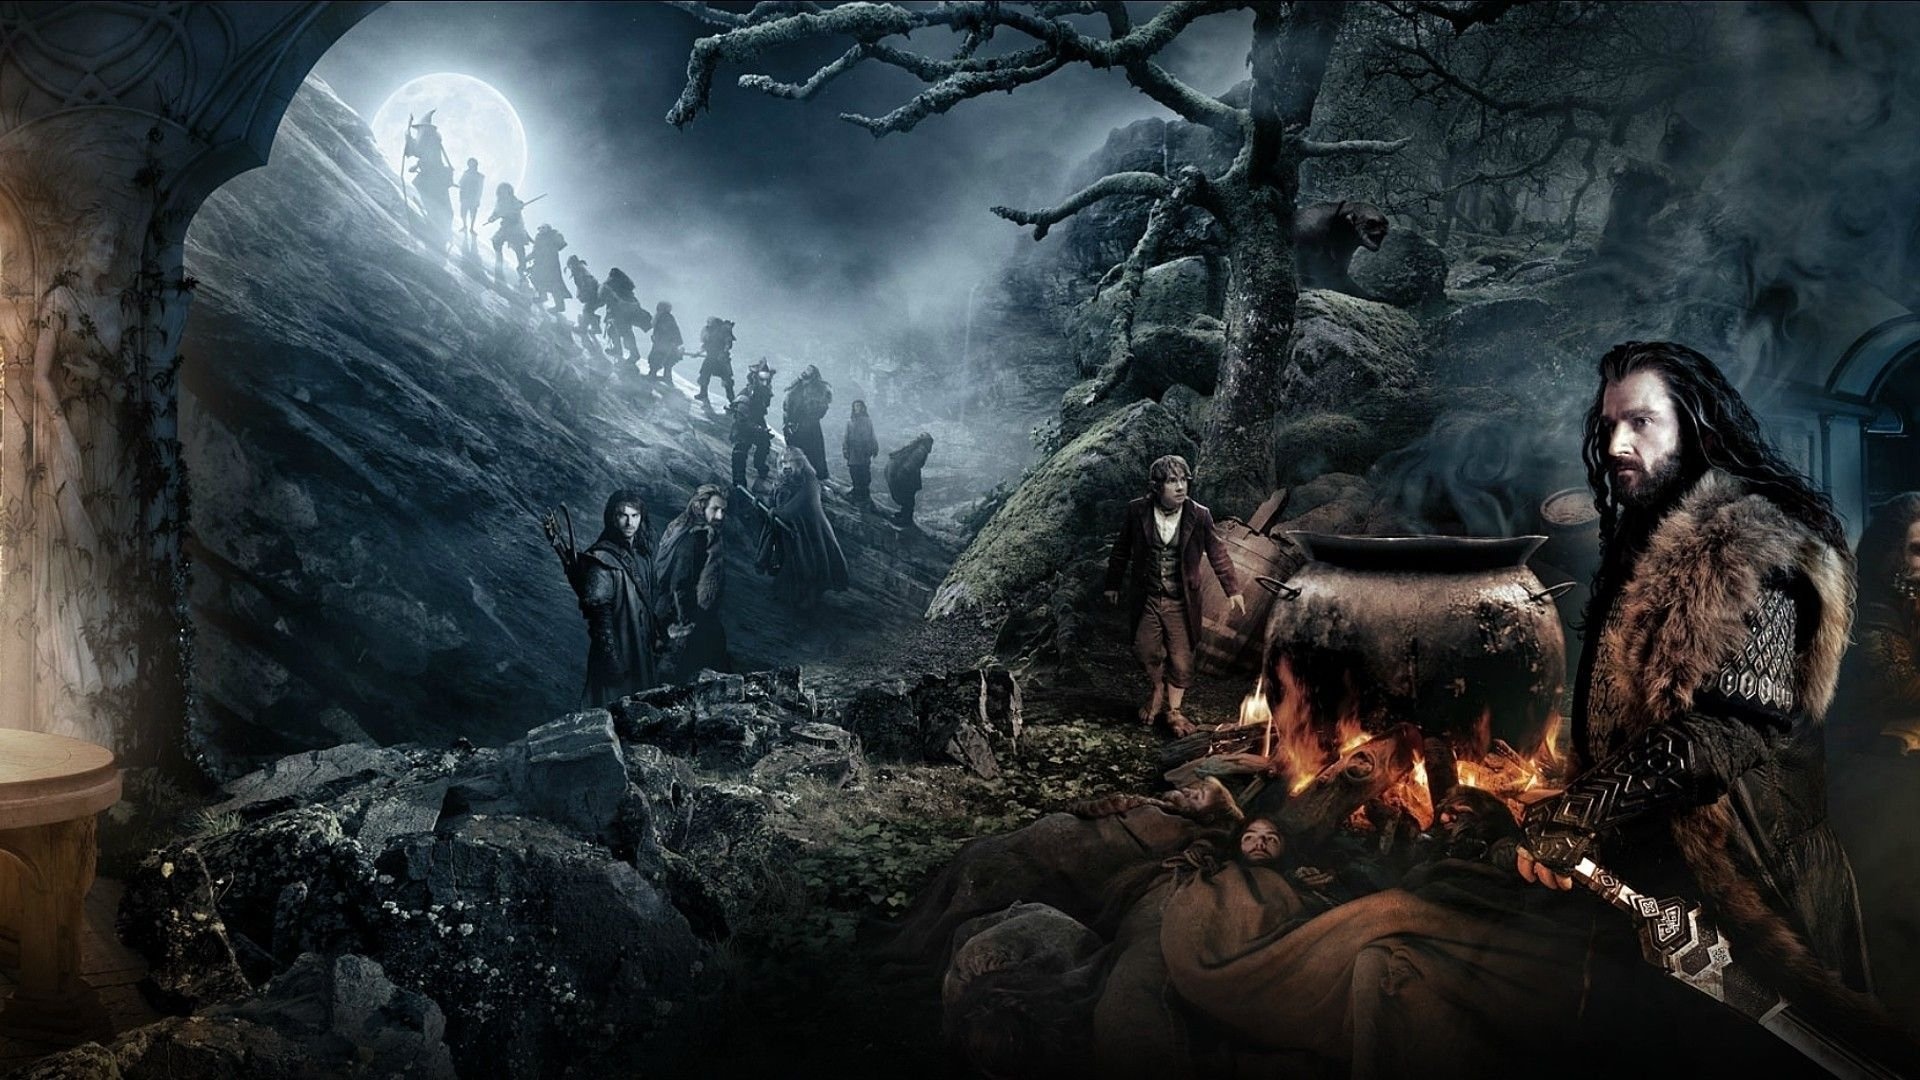 The Hobbit (Movie): Thorin Oakenshield, The leader of the Company of Dwarves. 1920x1080 Full HD Background.